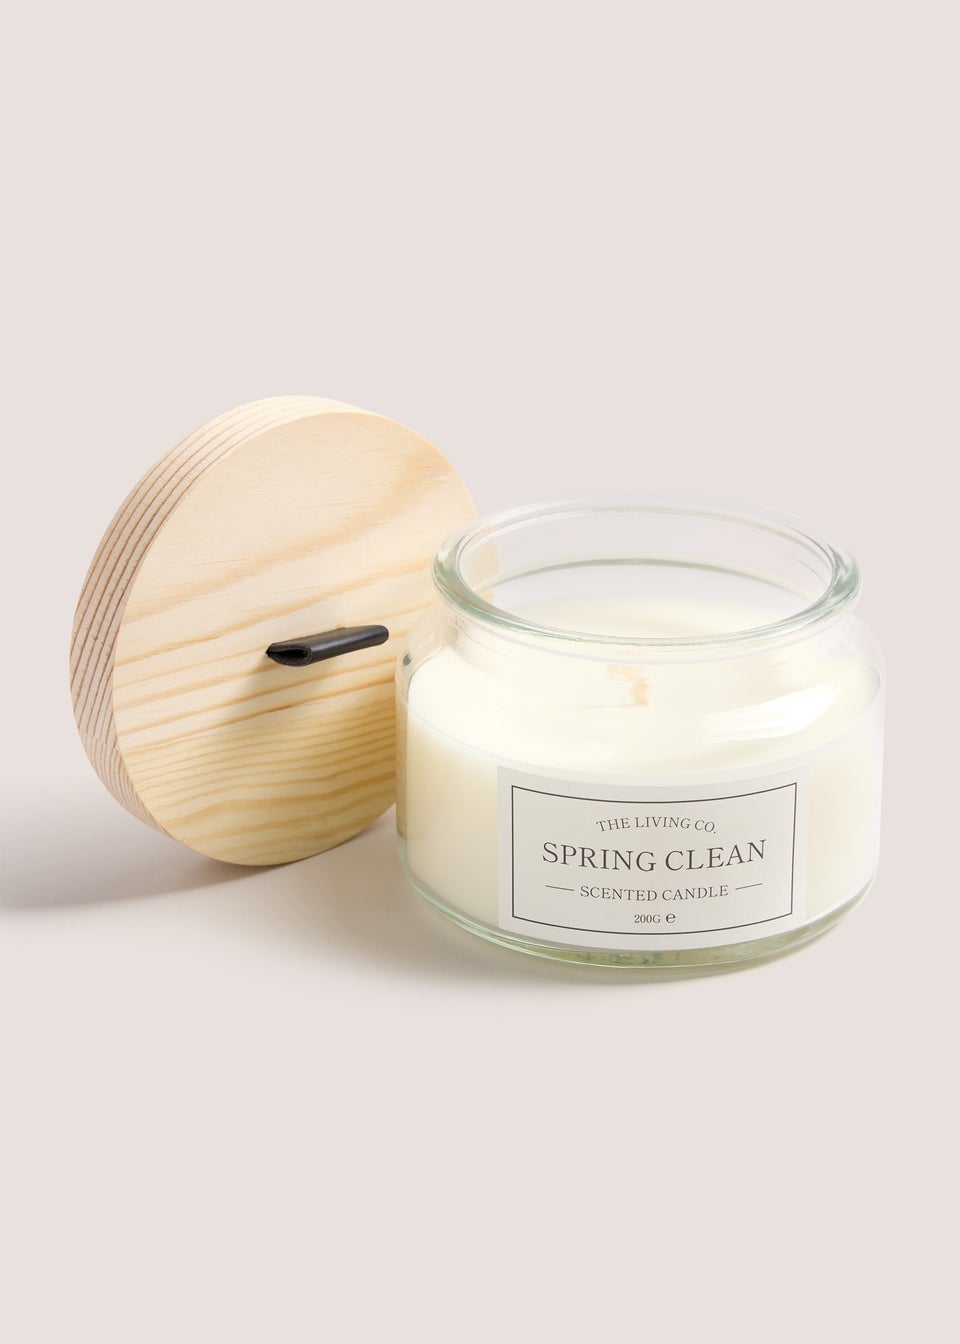 Spring Clean Scented Candle (200g)